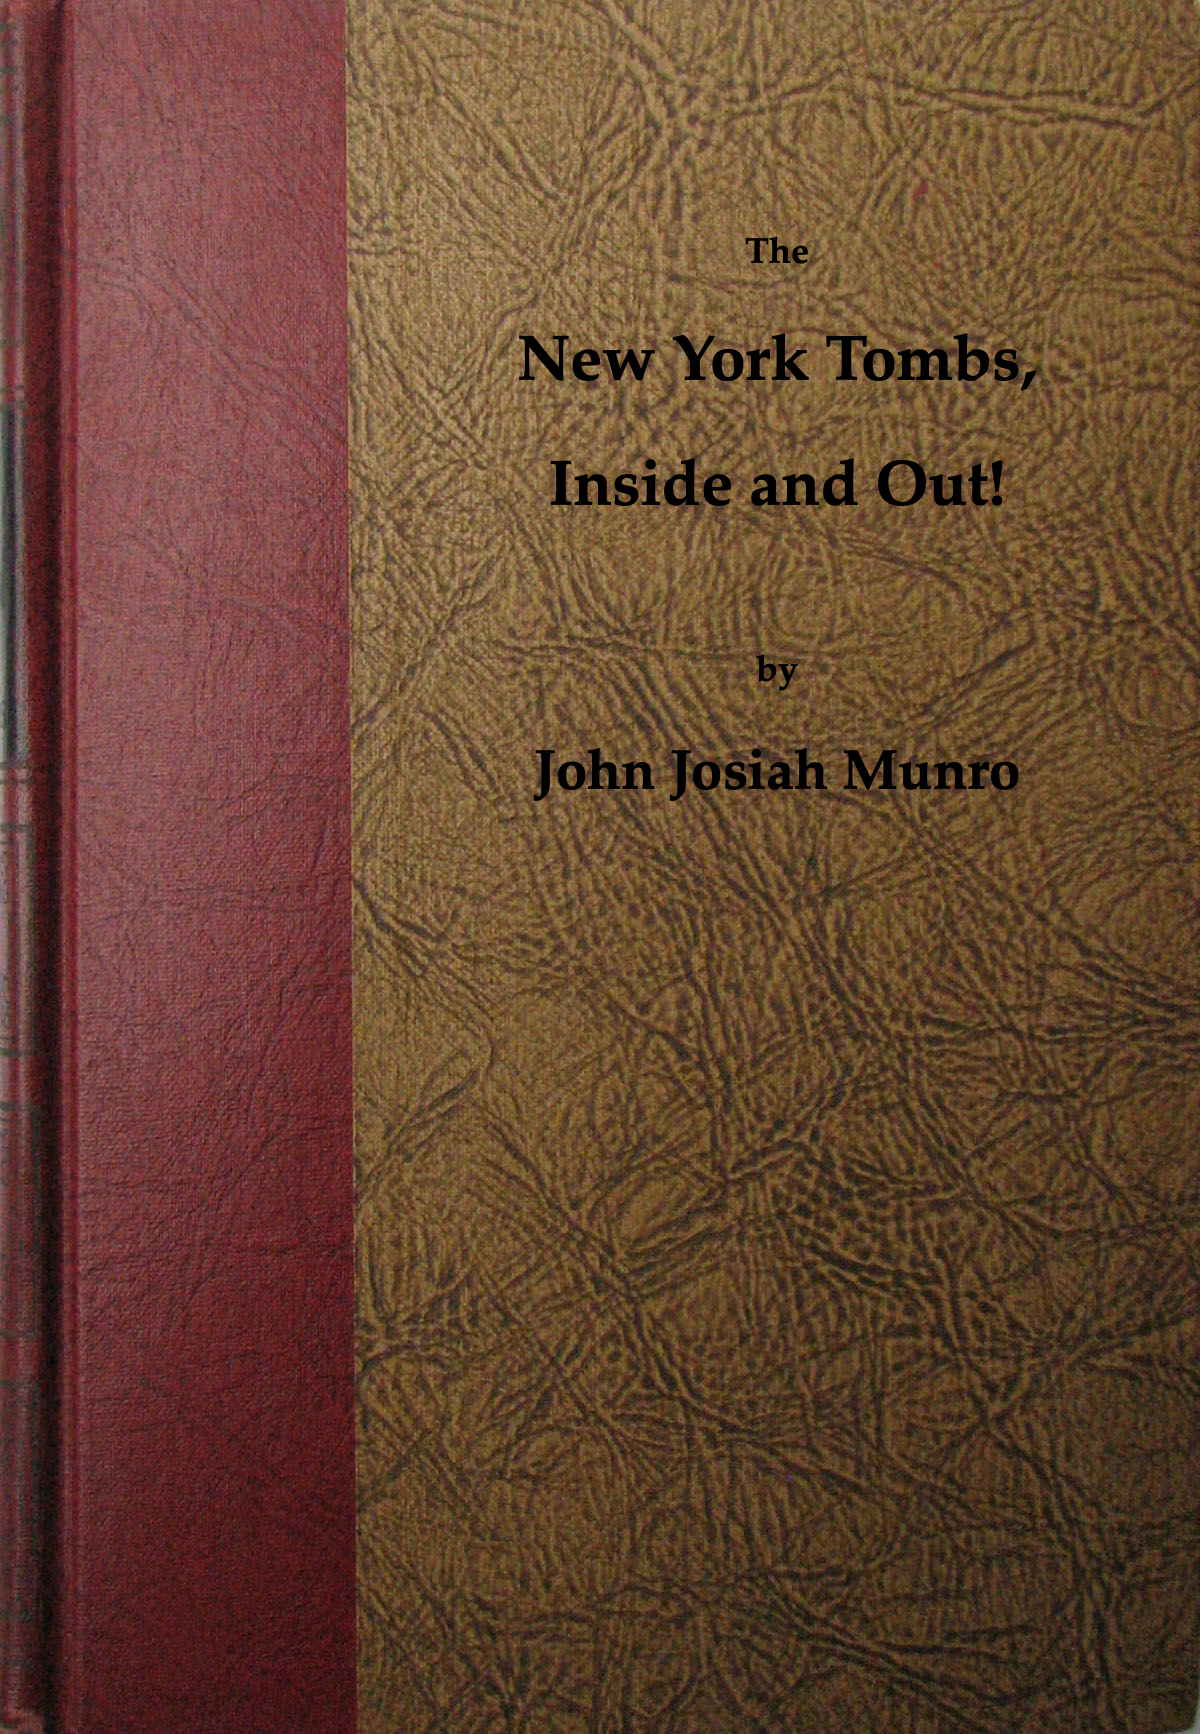 The New York Tombs Inside and Out!&#10;Scenes and Reminiscences Coming Down to the Present. A Story Stranger Than Fiction, with an Historic Account of America's Most Famous Prison.